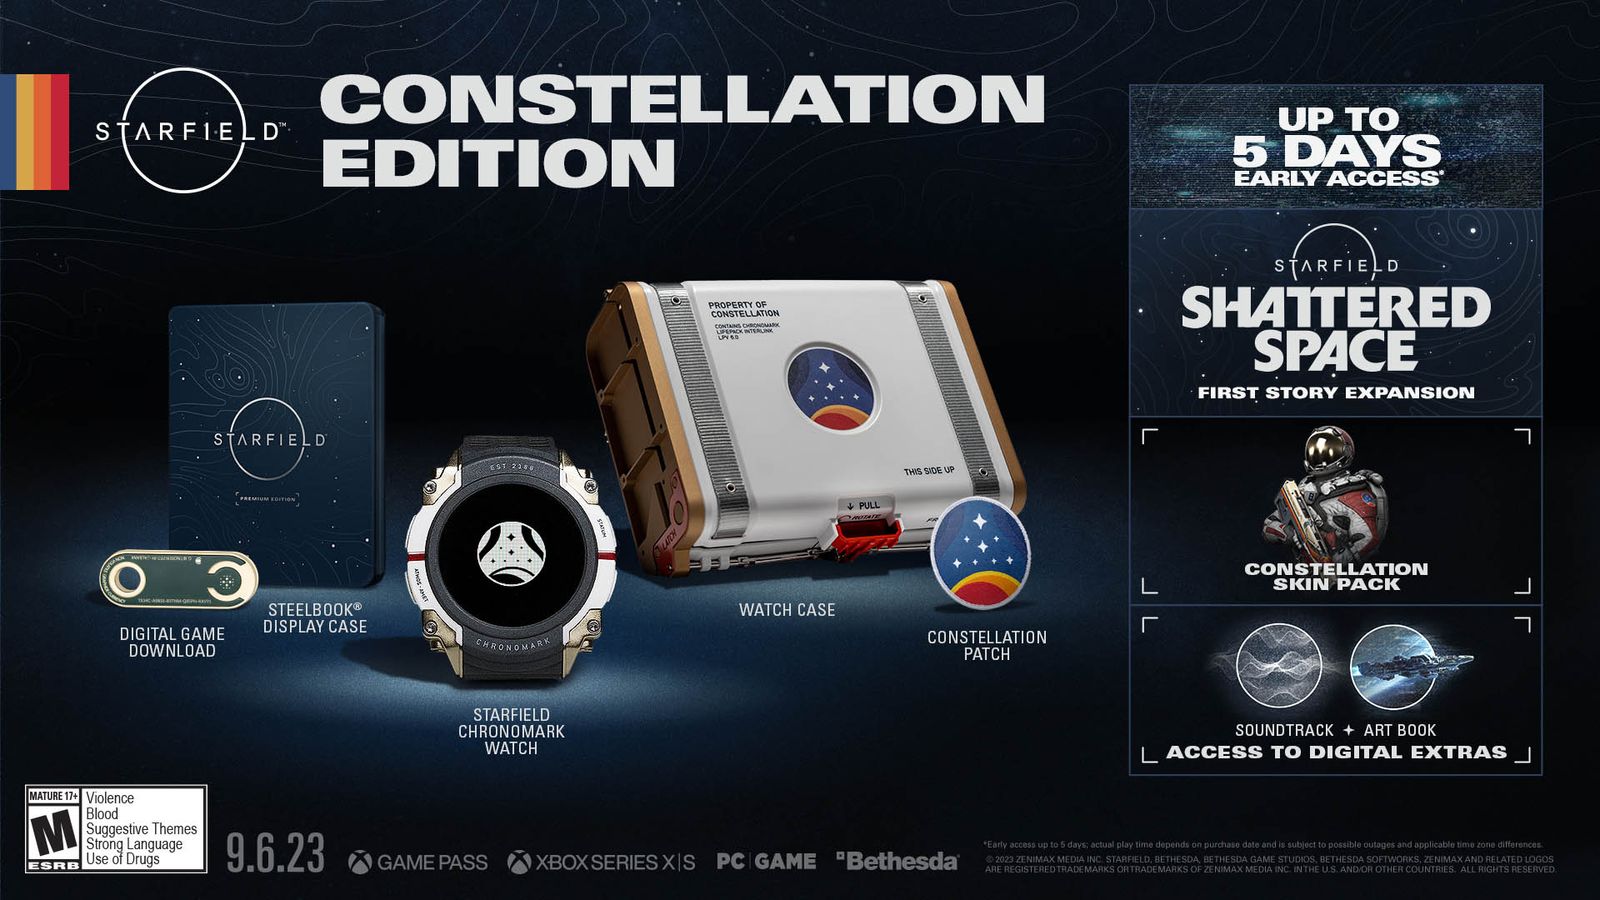 The Constellation Edition of Starfield showing all of its pre-order bonuses.